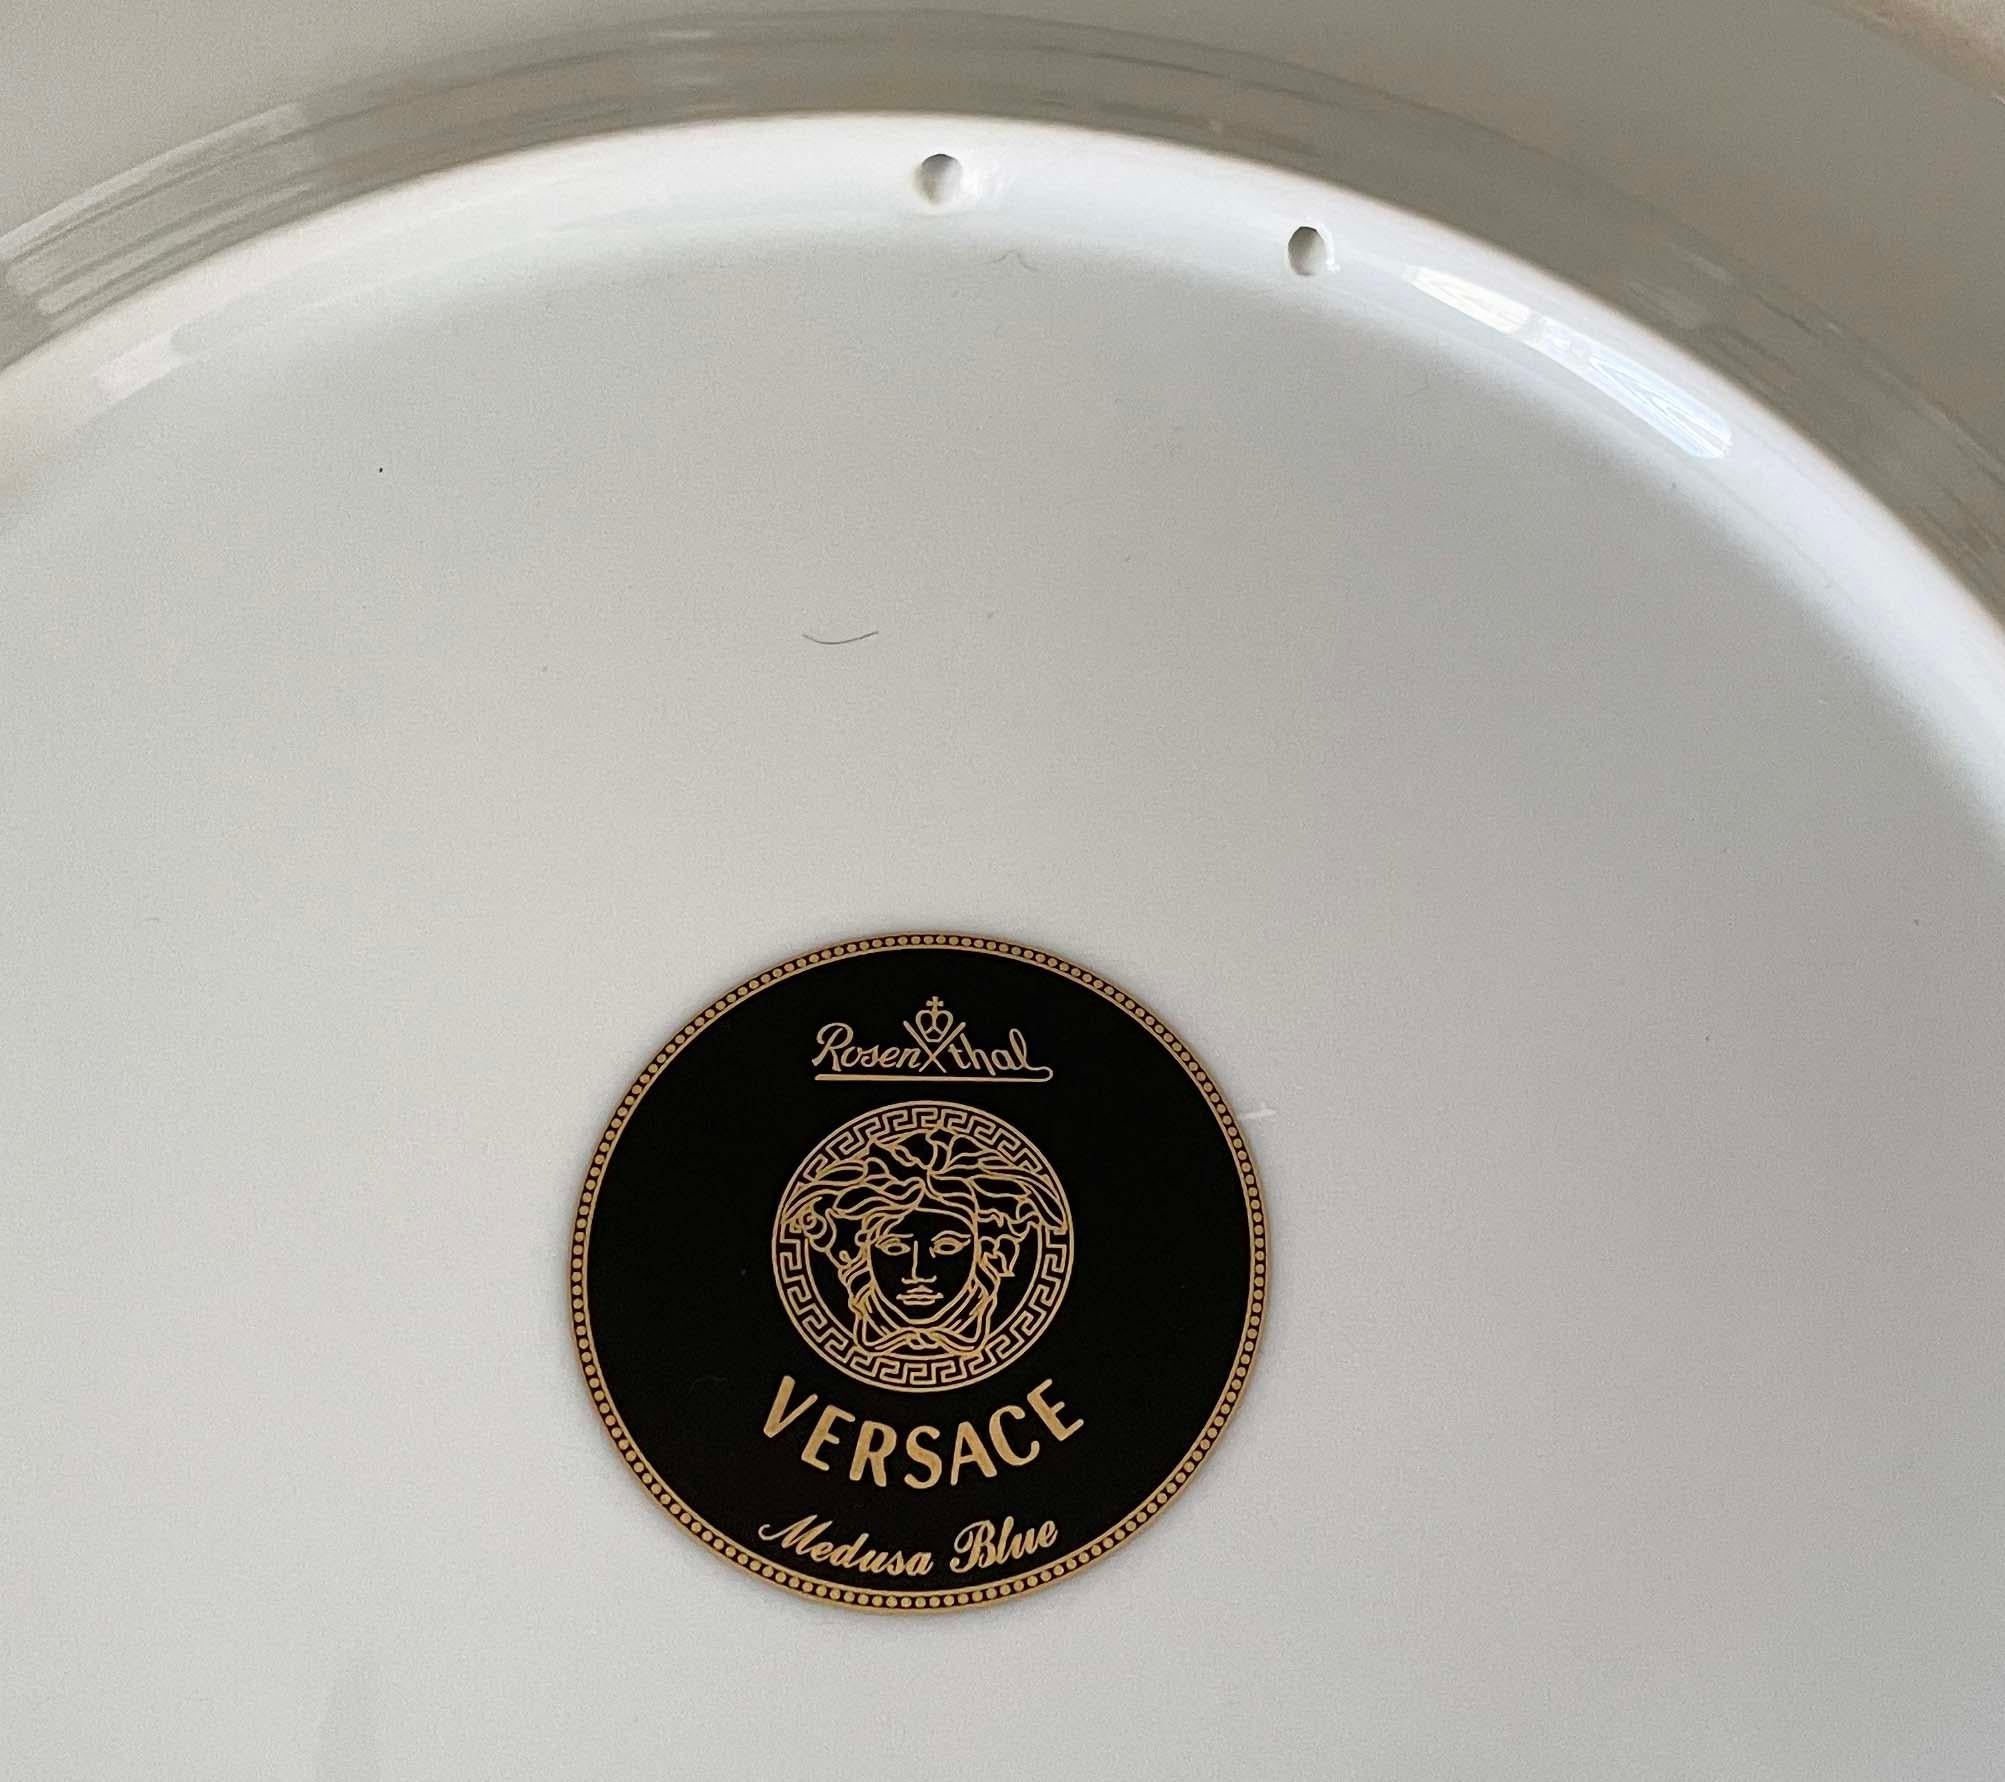 An blue Versace porcelain Medusa display plate manufactured by Rosenthal, Germany.  

Decorated in gold, blue and black to create a high quality accessory,  in the original Versace gift box.

Rosenthal GmbH is a German manufacturer of porcelain